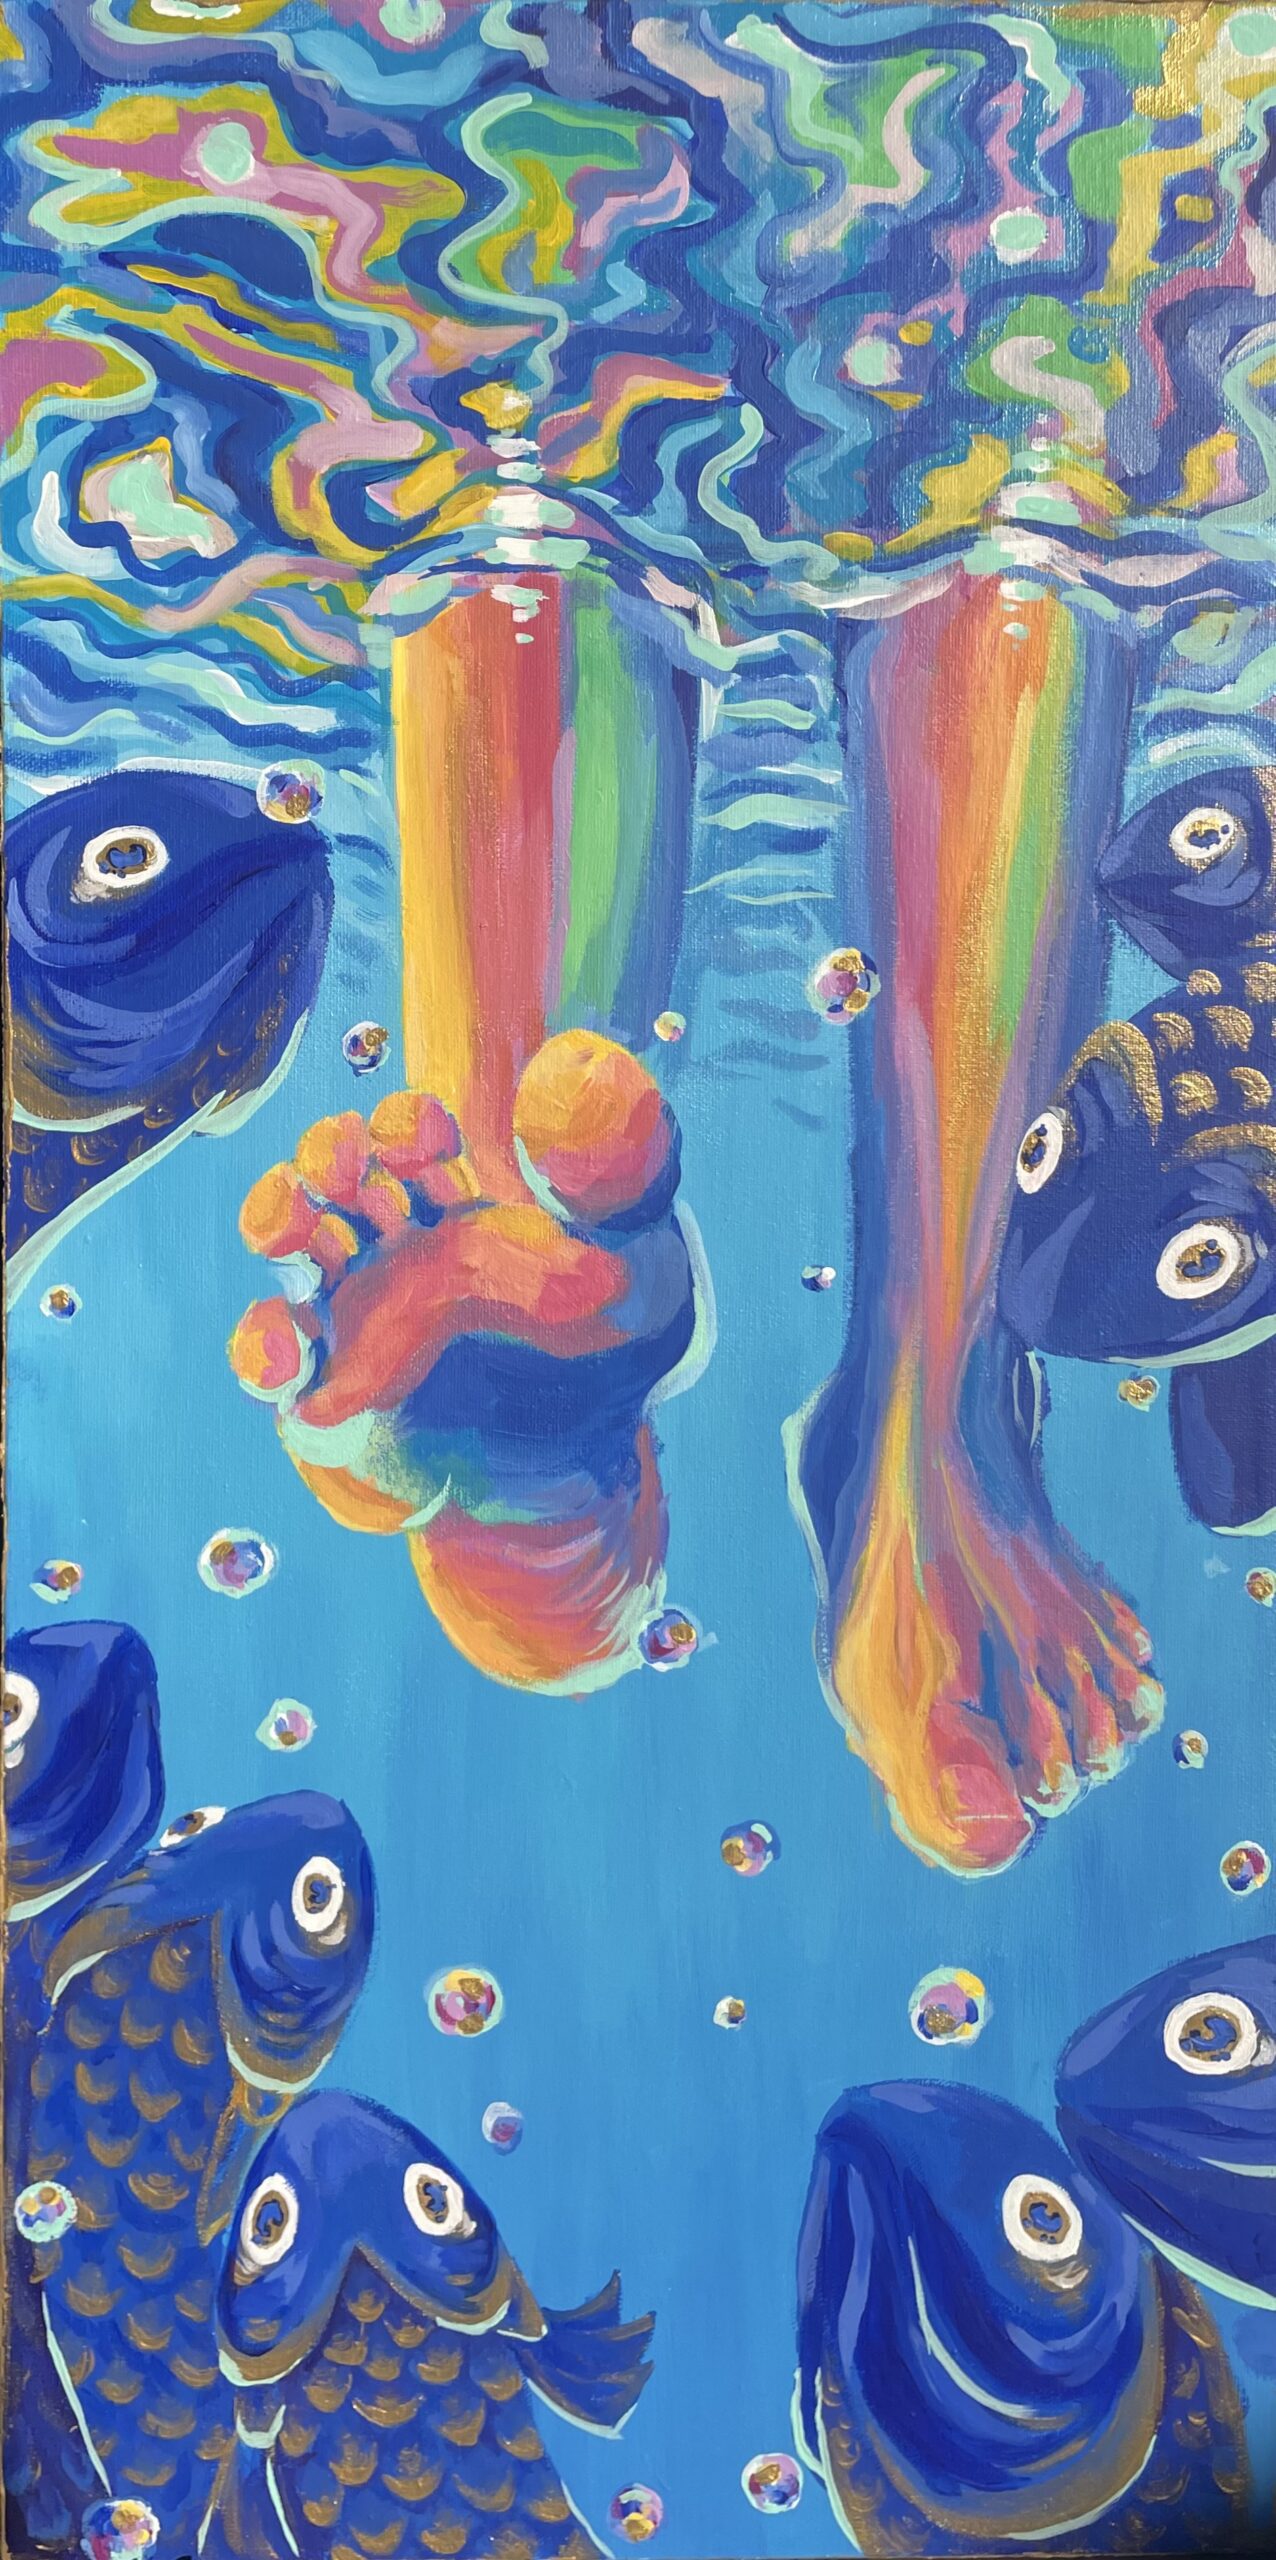 Brightly colored painting of feet in the water with fish. Lots of blues contrasted with oranges.